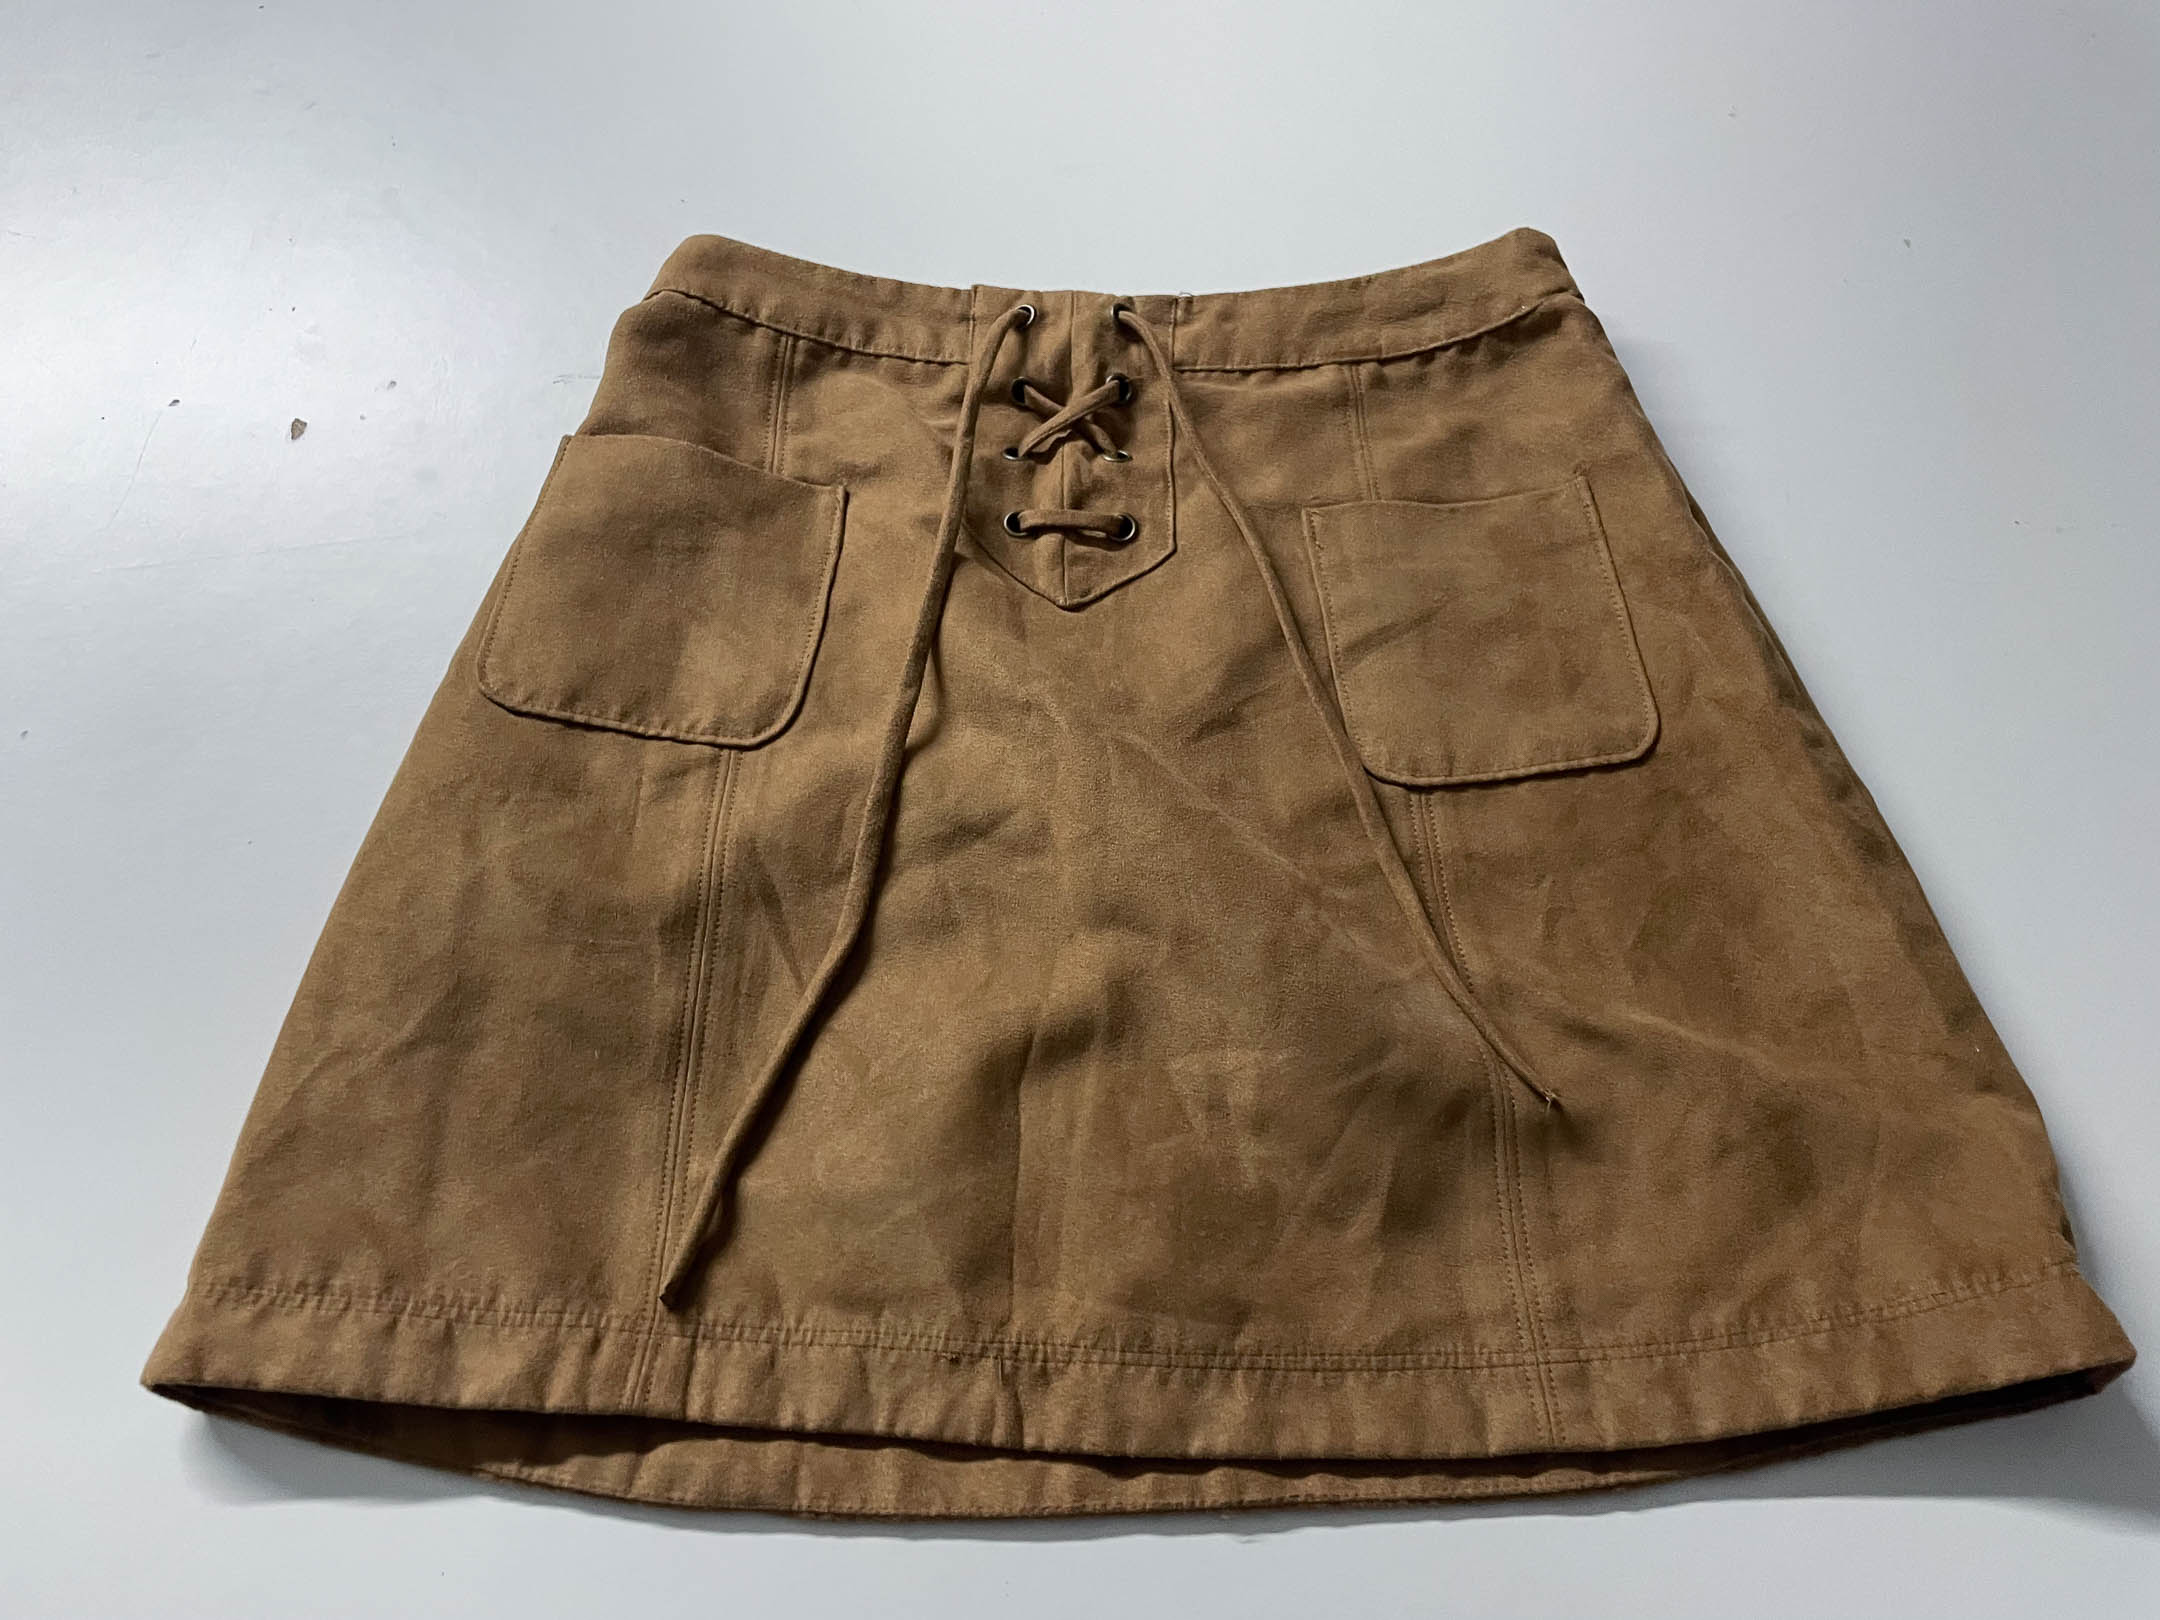 Vintage Women's Hollister Suede Tan Mini skirt in XS/S Made in China|L16 W26|SKU 4036